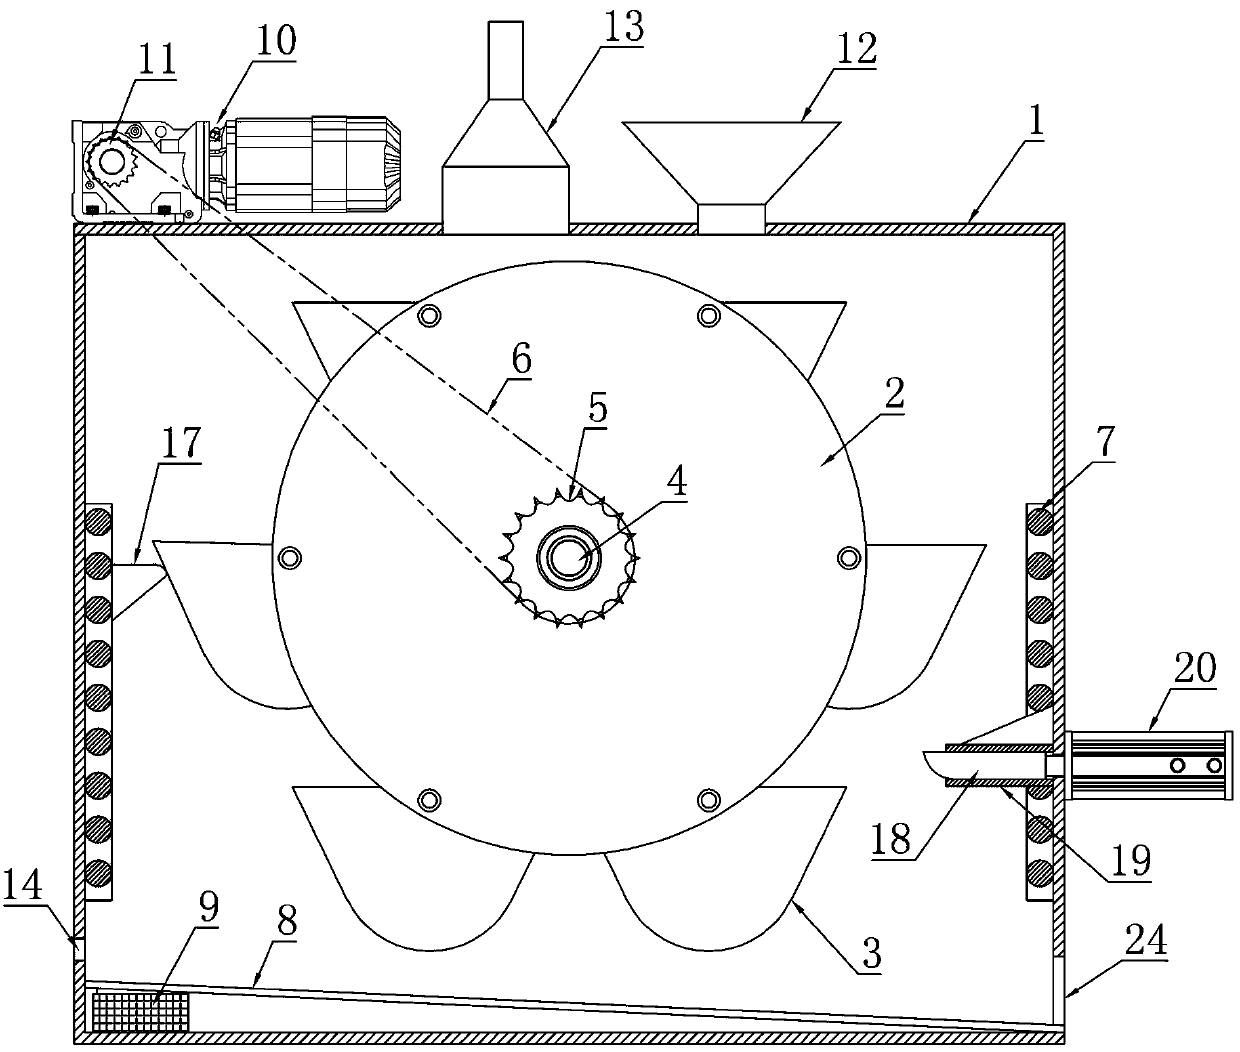 Vegetable dehydrating and drying device